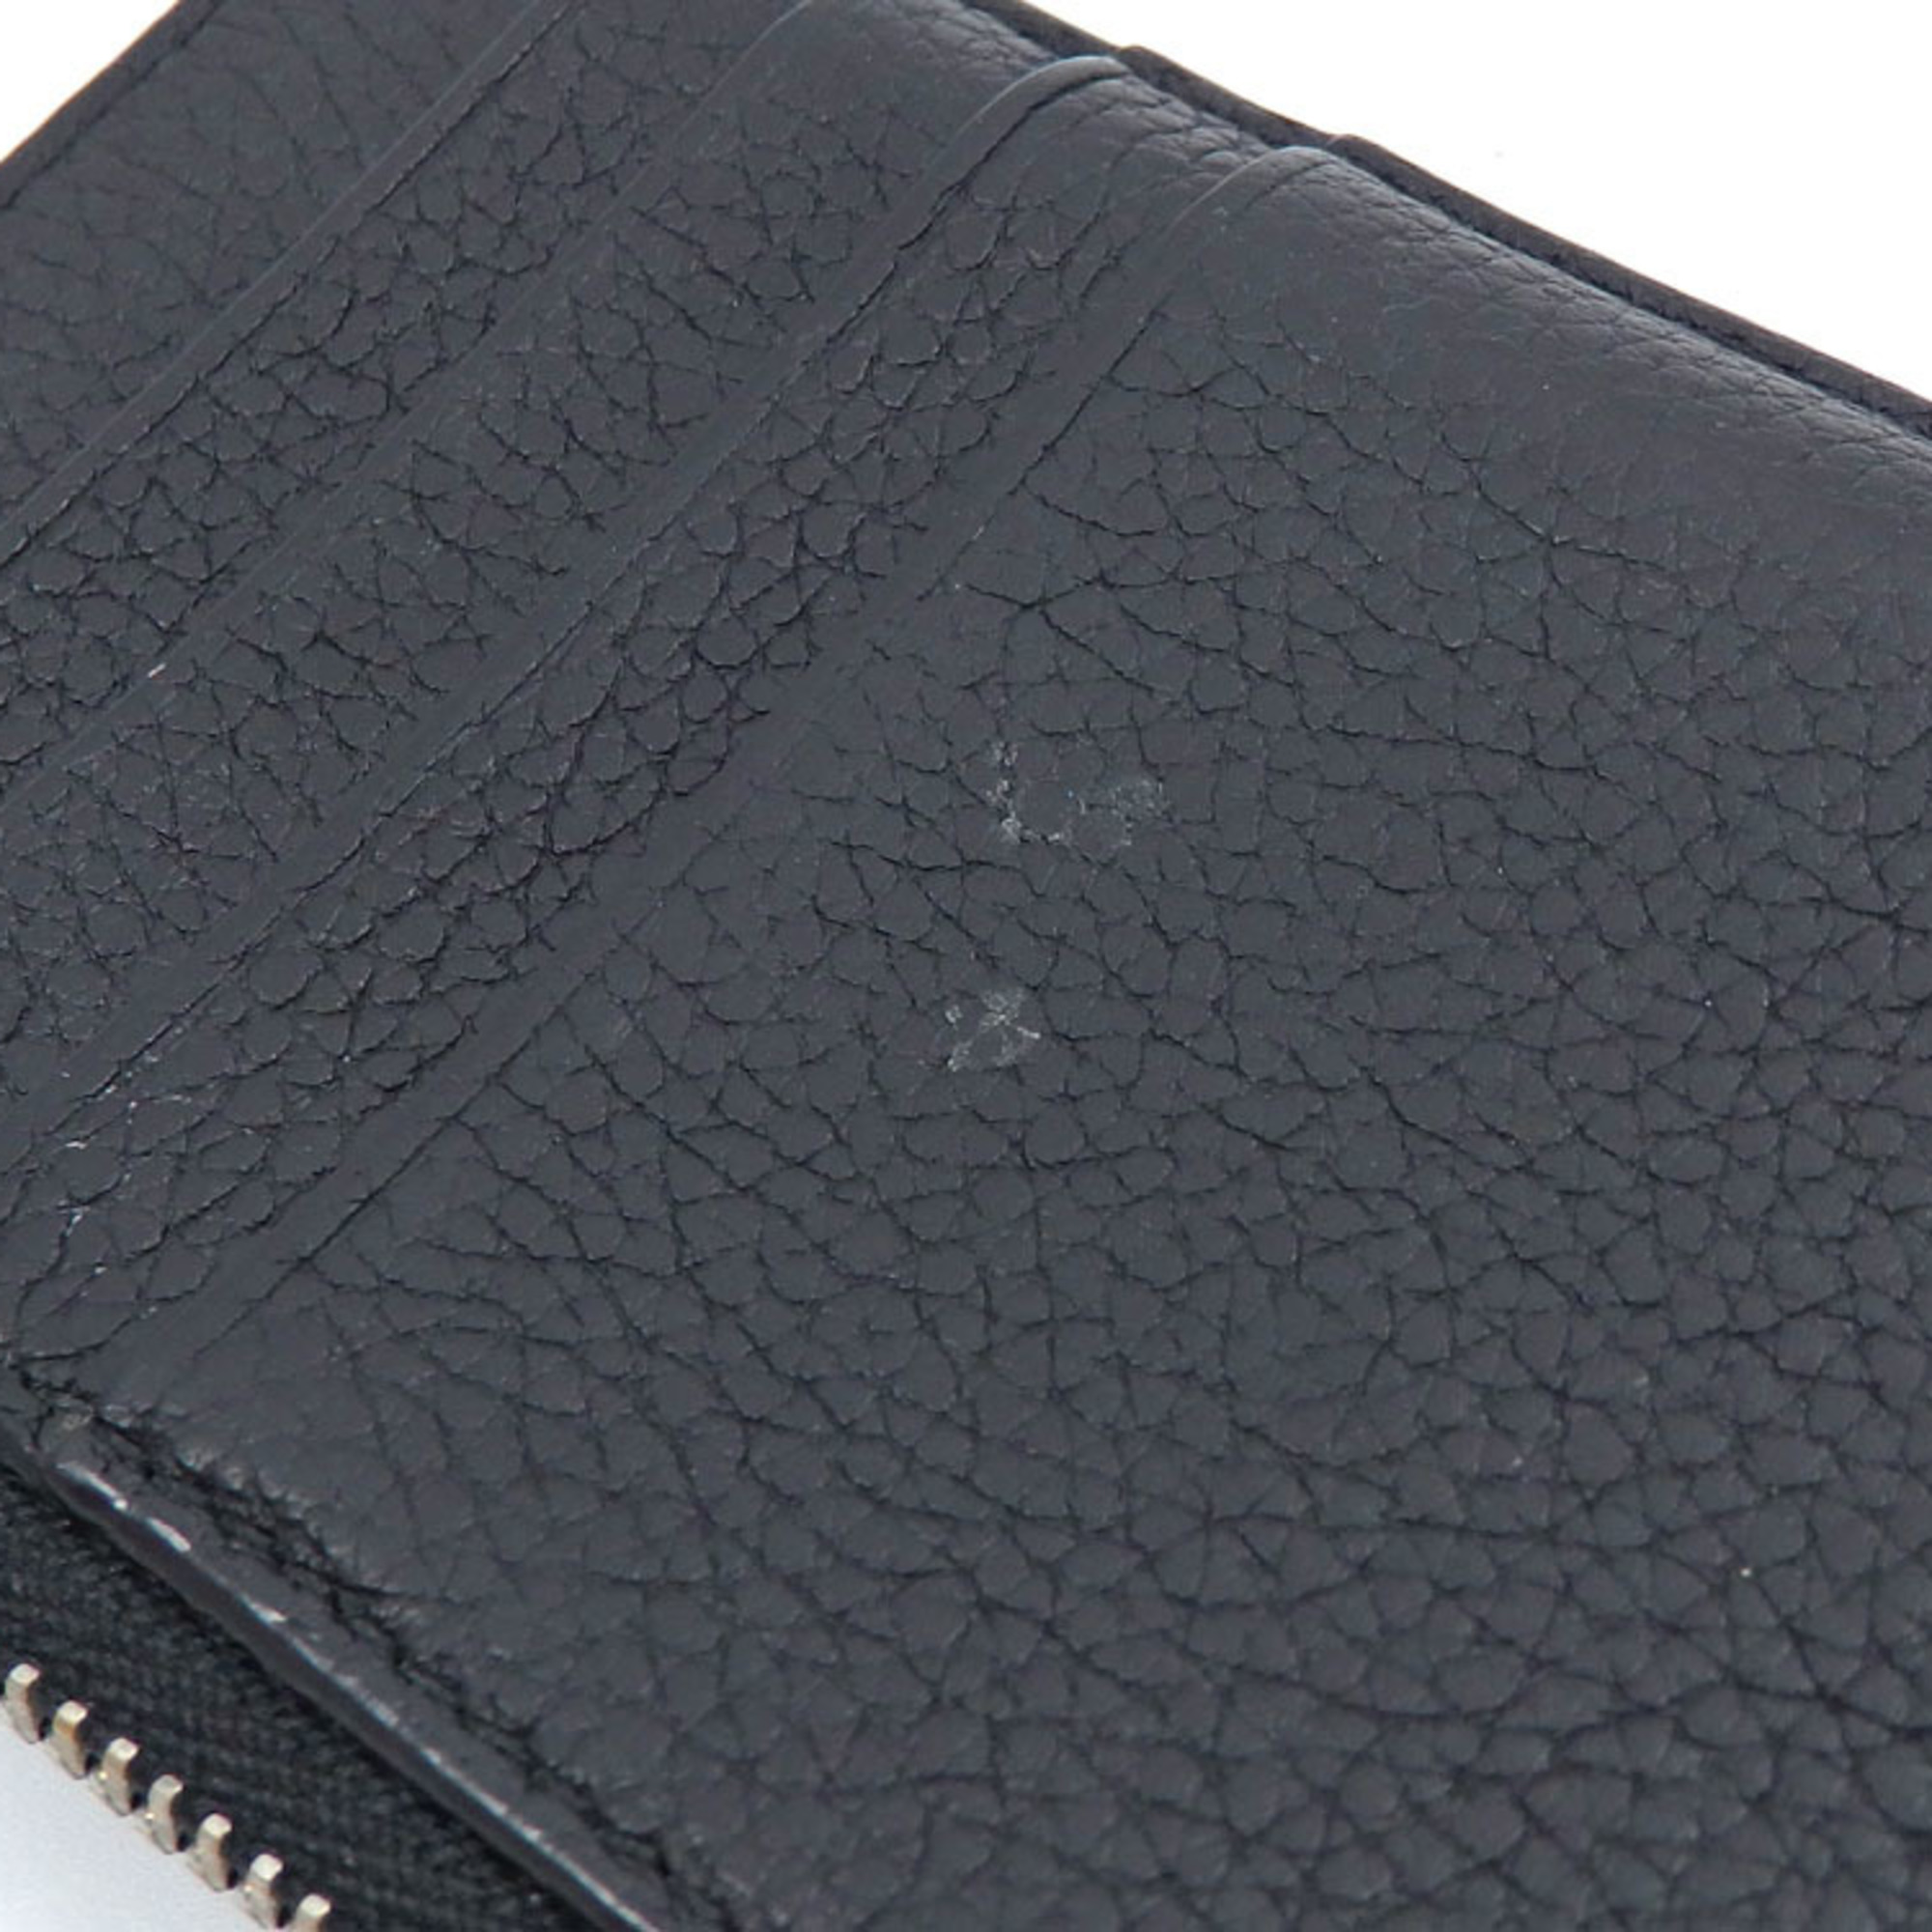 Loewe coin case, card holder, black, leather, purse, L-shaped, for women, men, and unisex